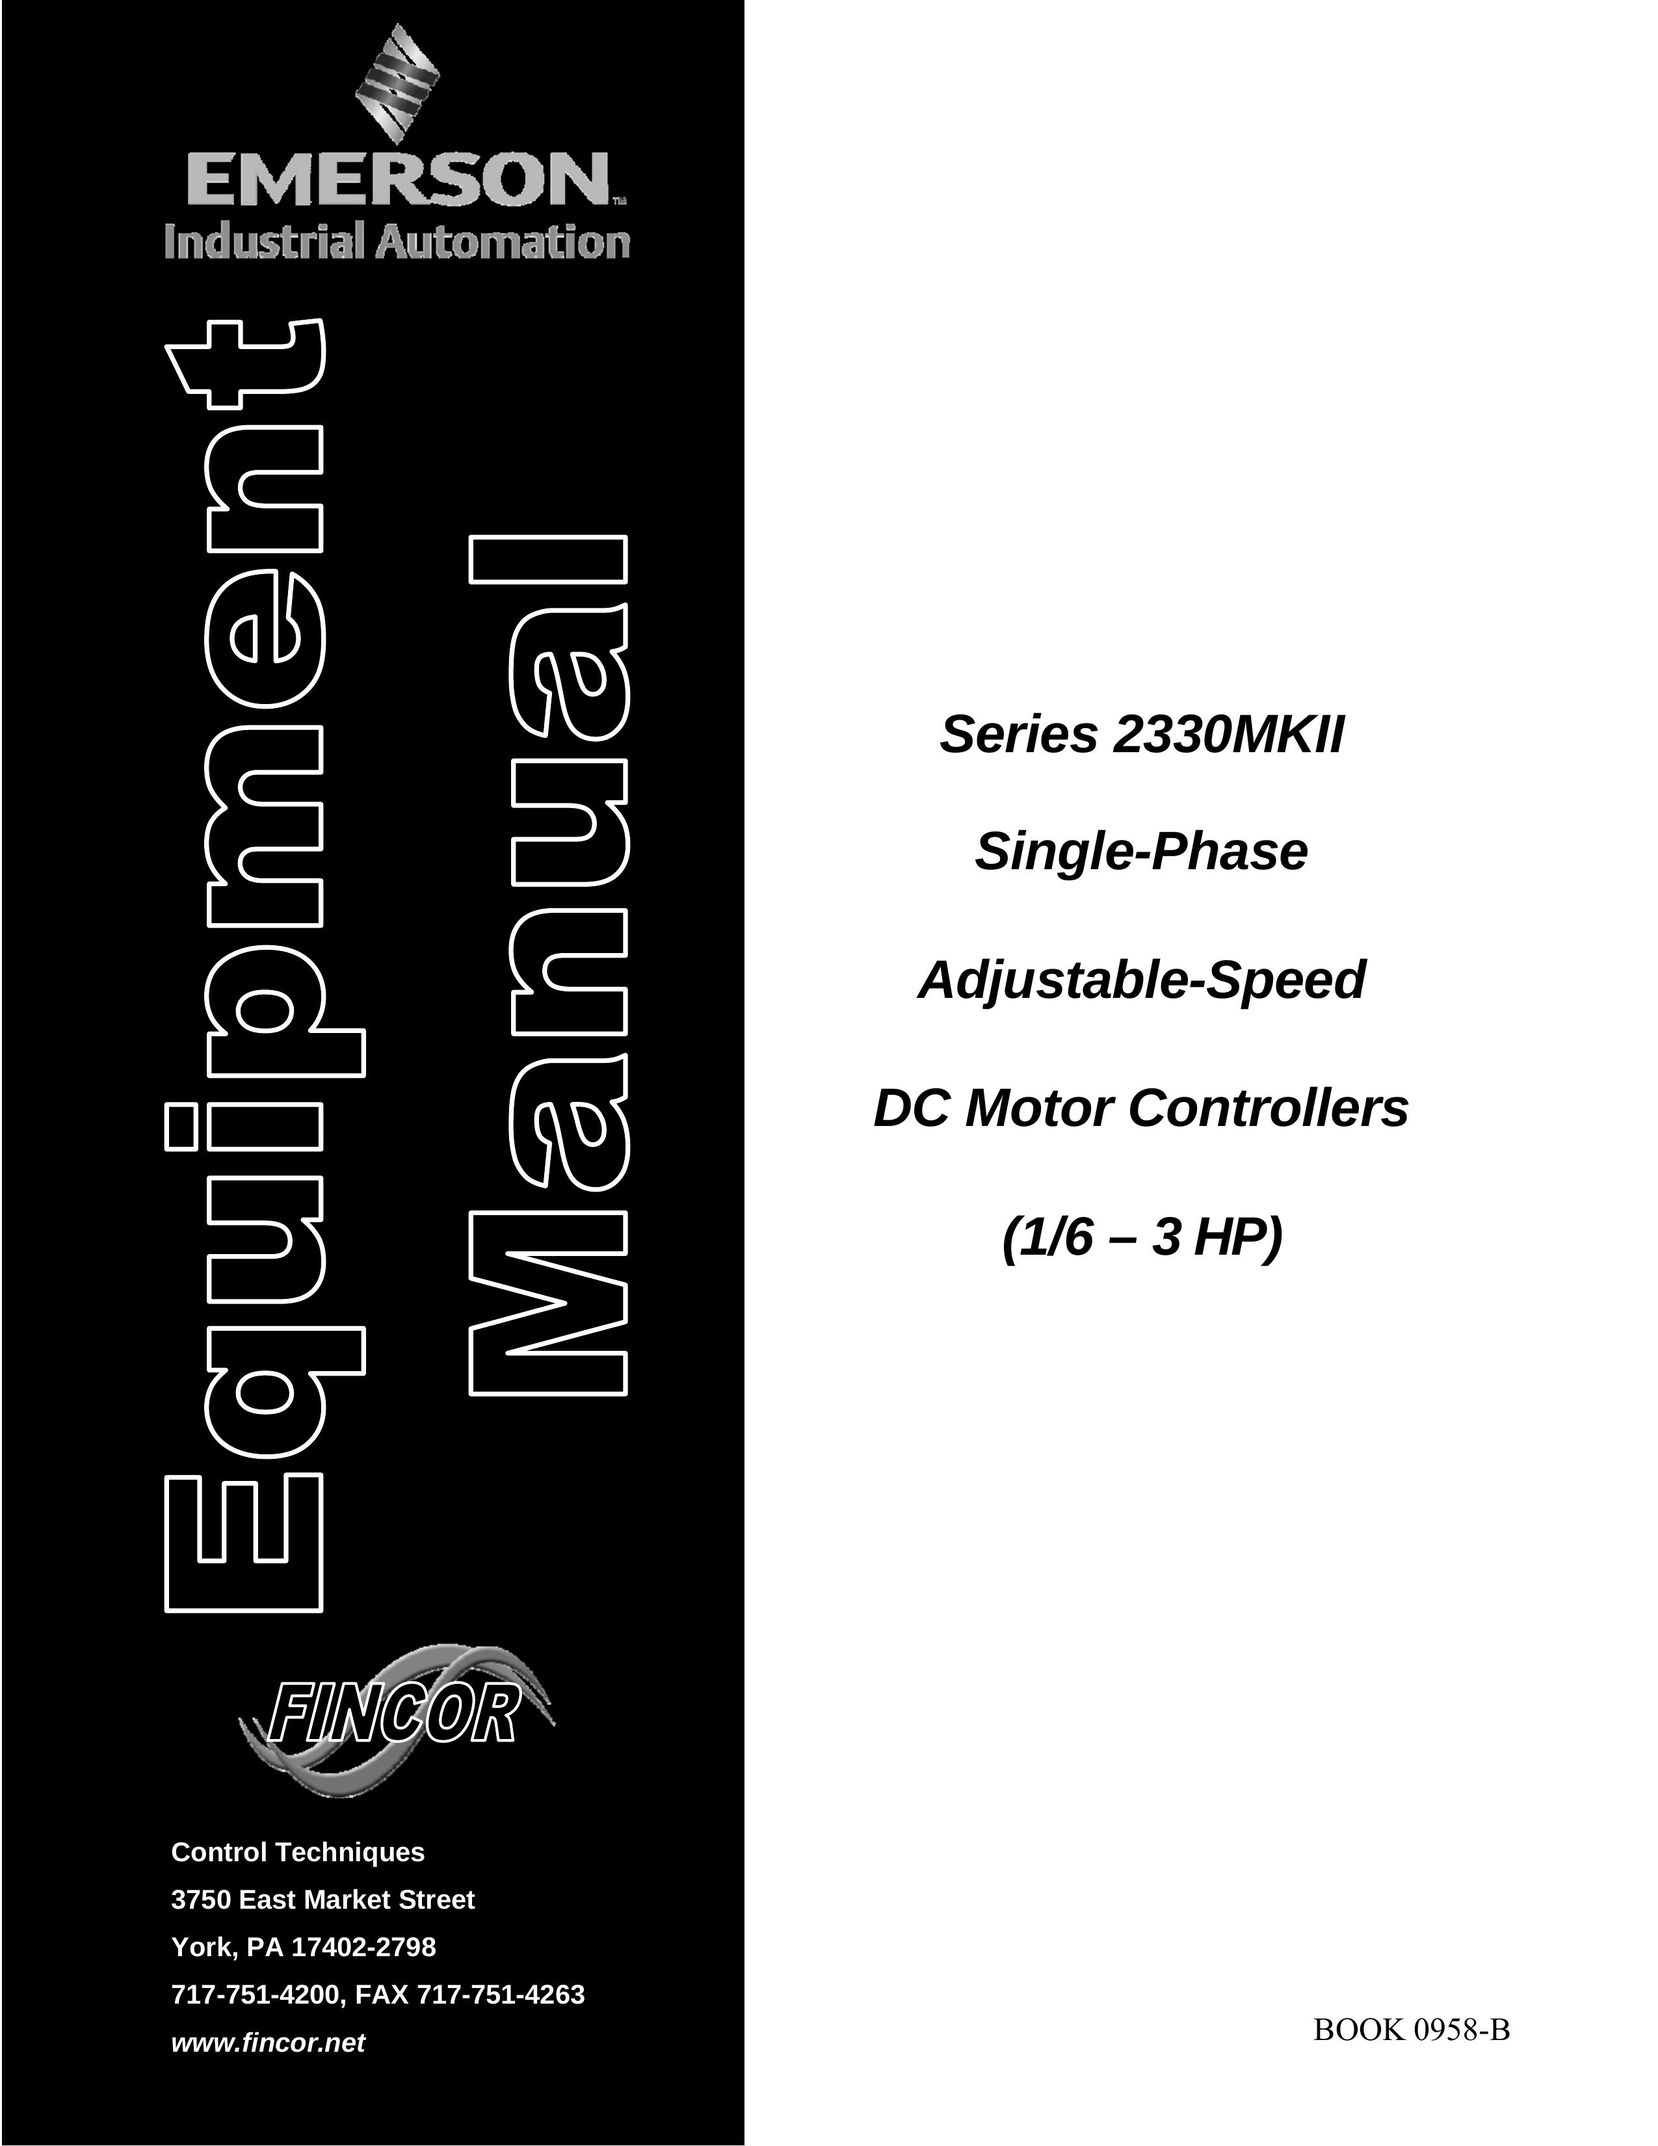 Emerson 2330MKII Welding System User Manual